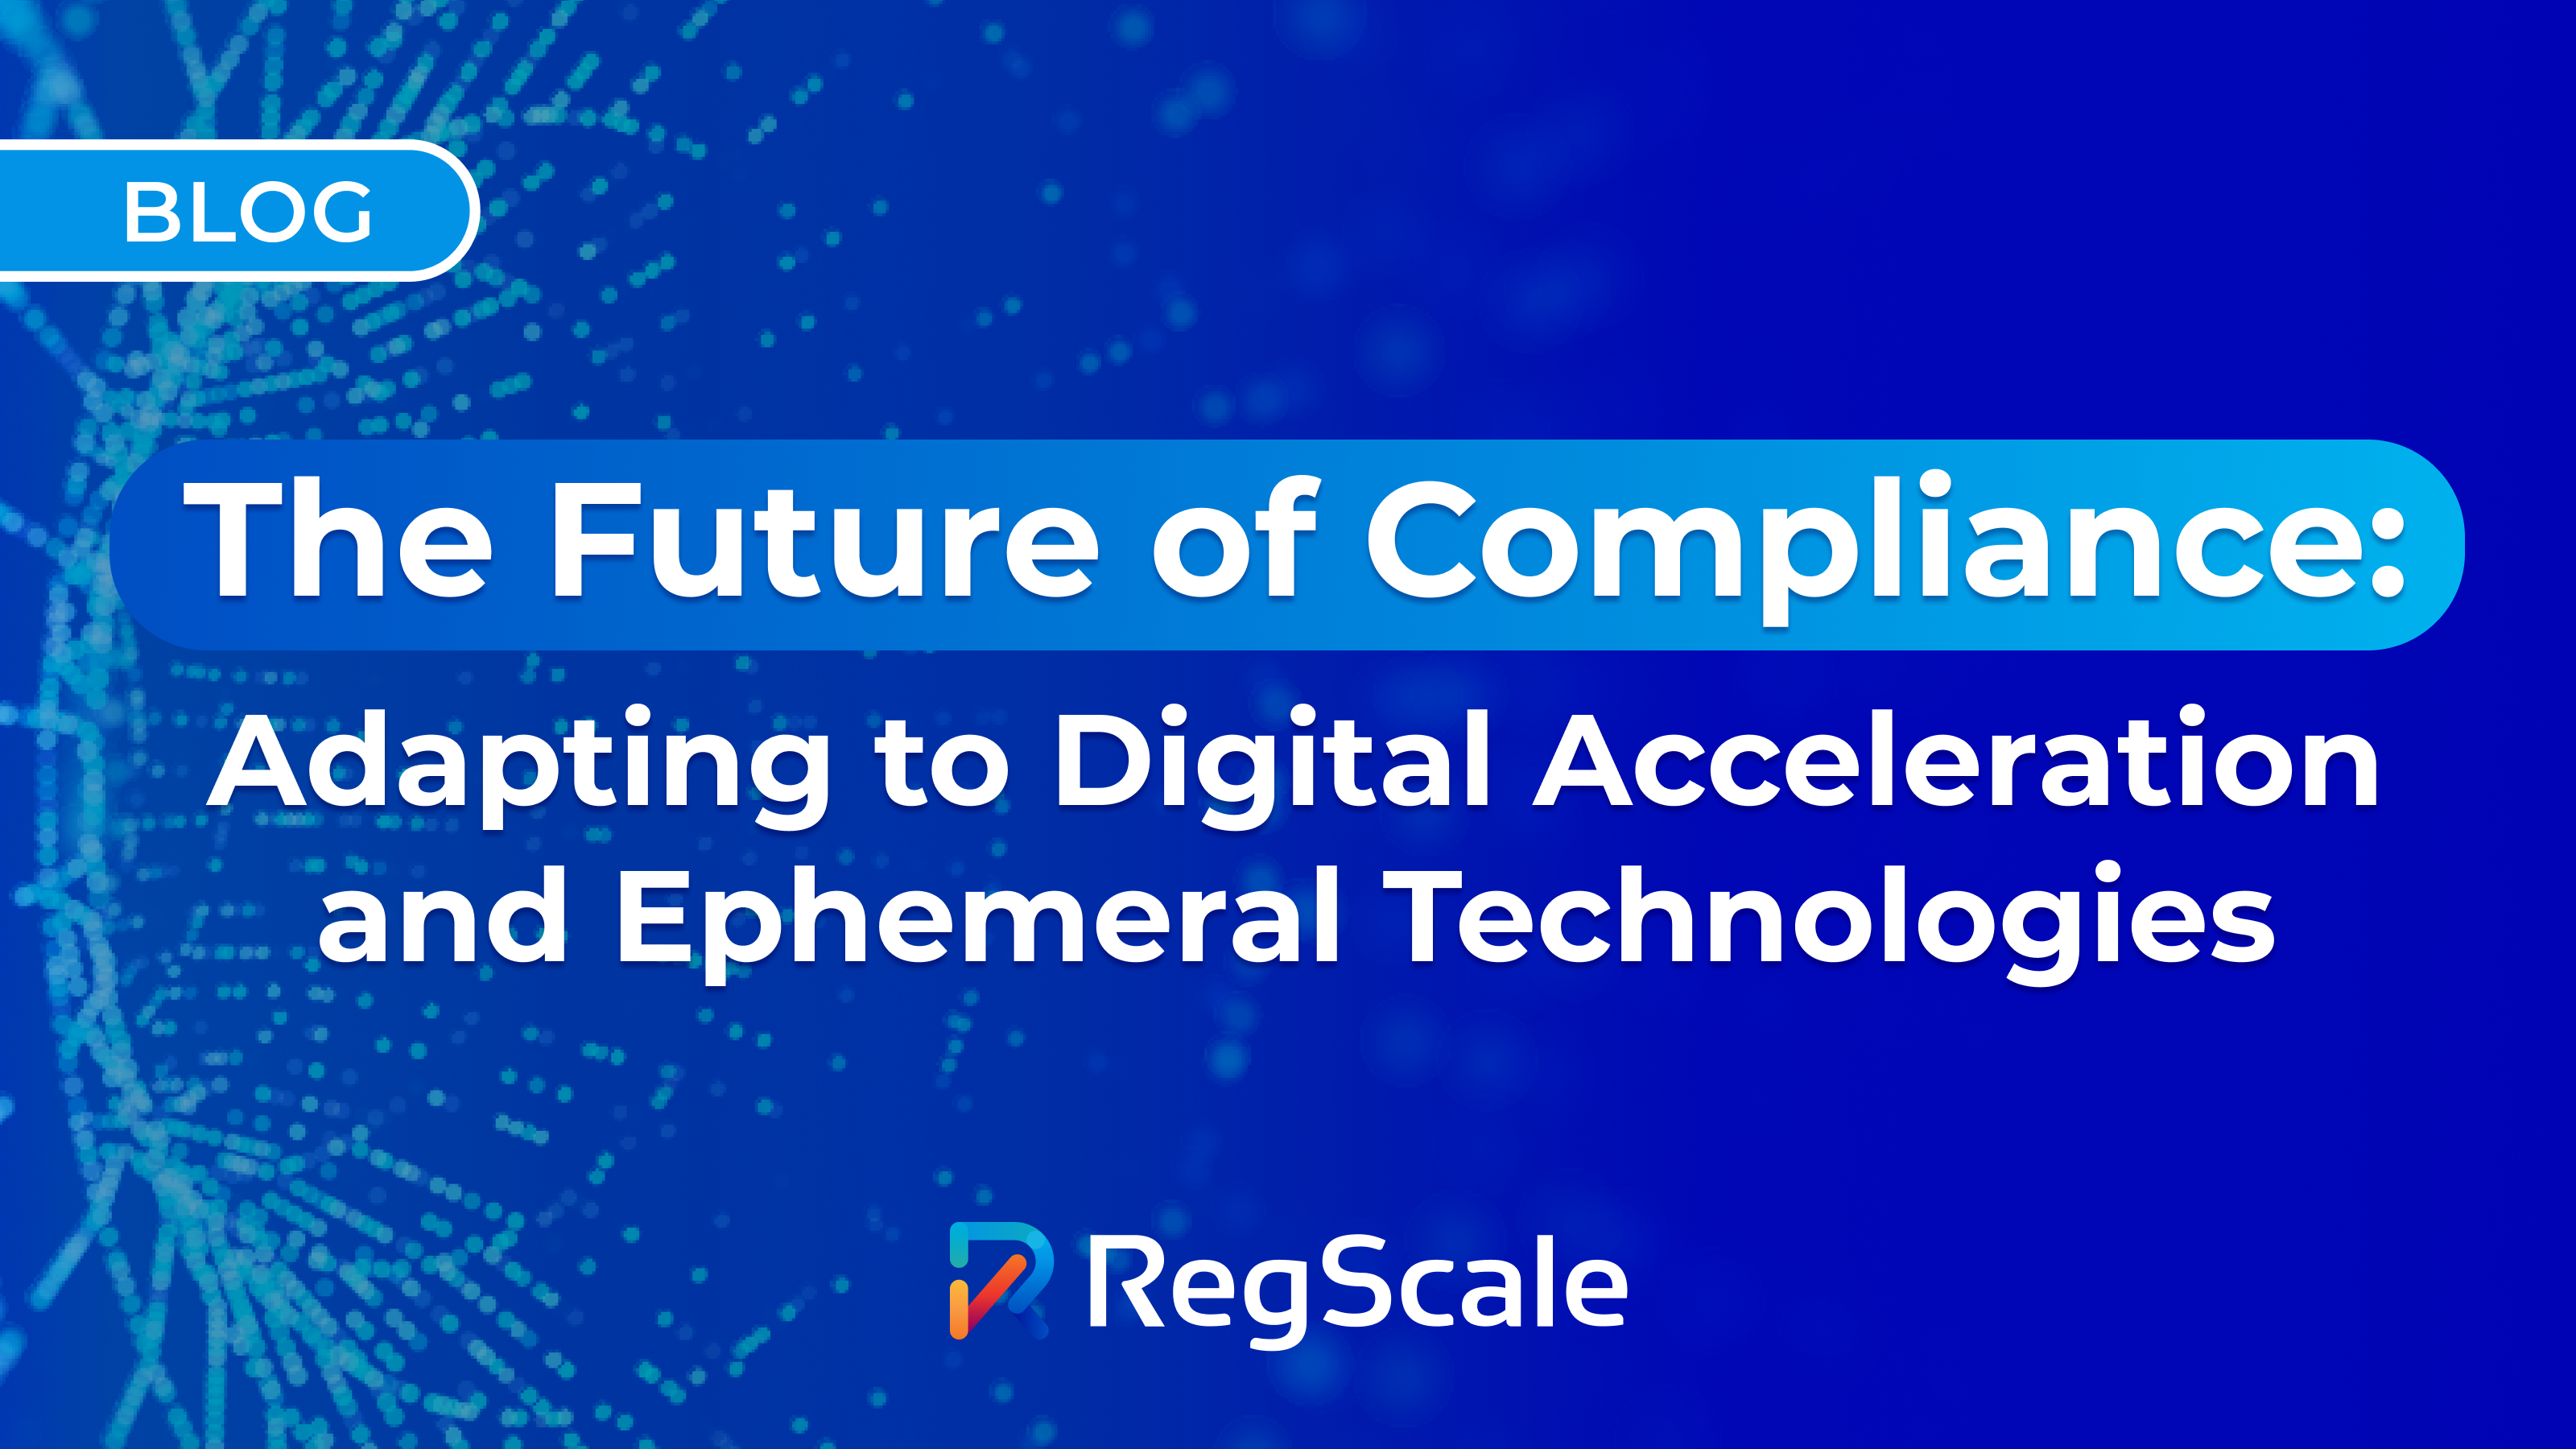 The Future of Compliance: Adapting to Digital Acceleration and Ephemeral Technologies